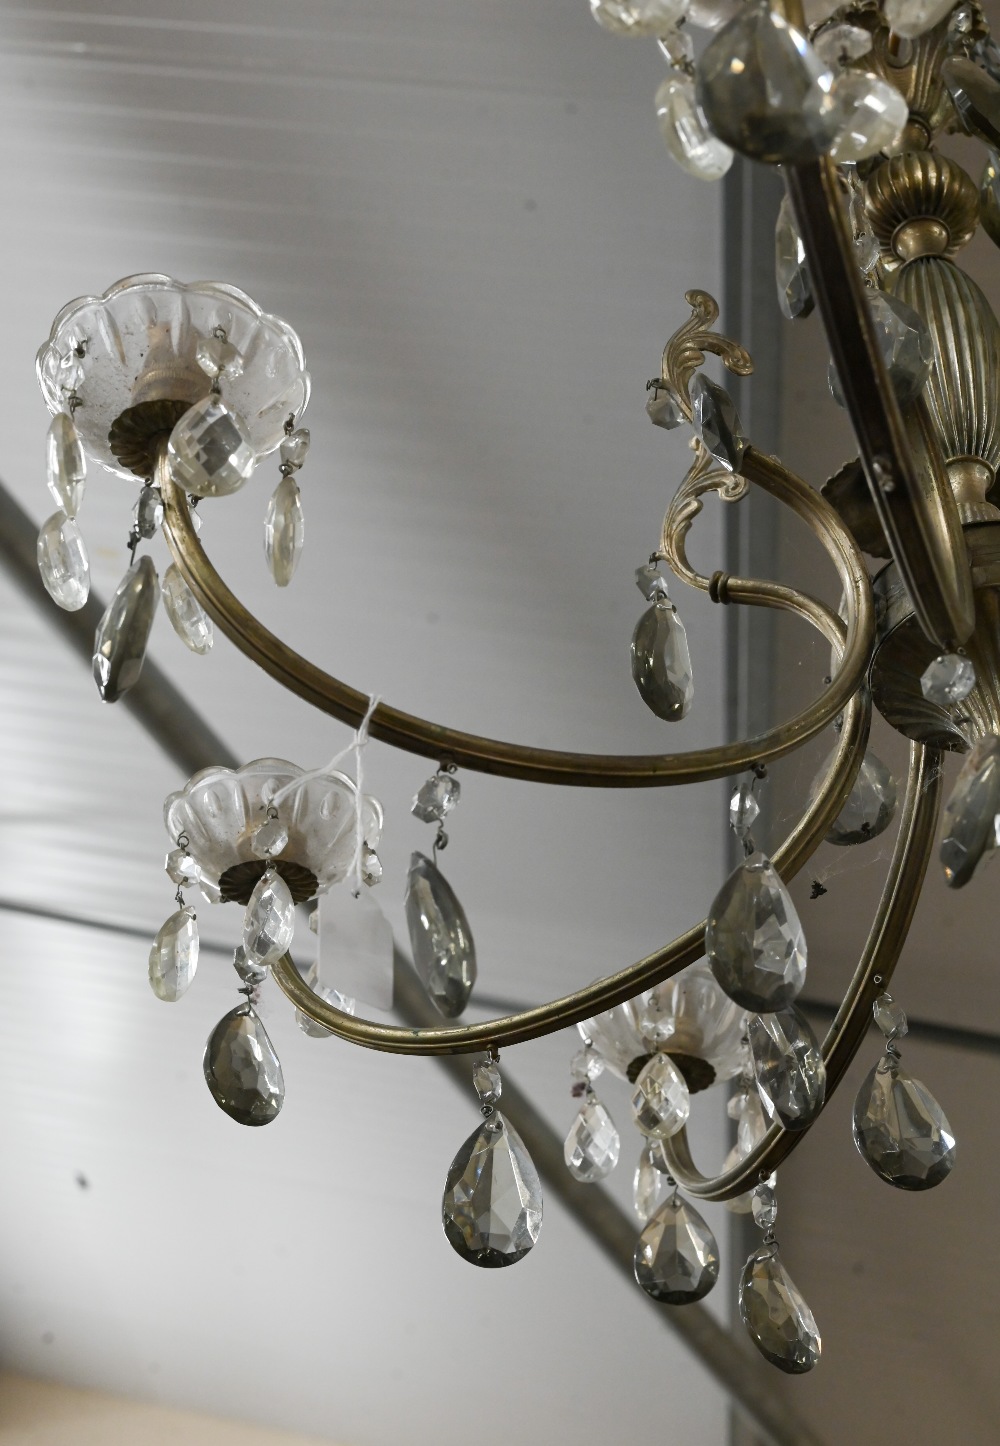 An eight-branch electrolier chandelier with faceted glass drops - Image 3 of 4